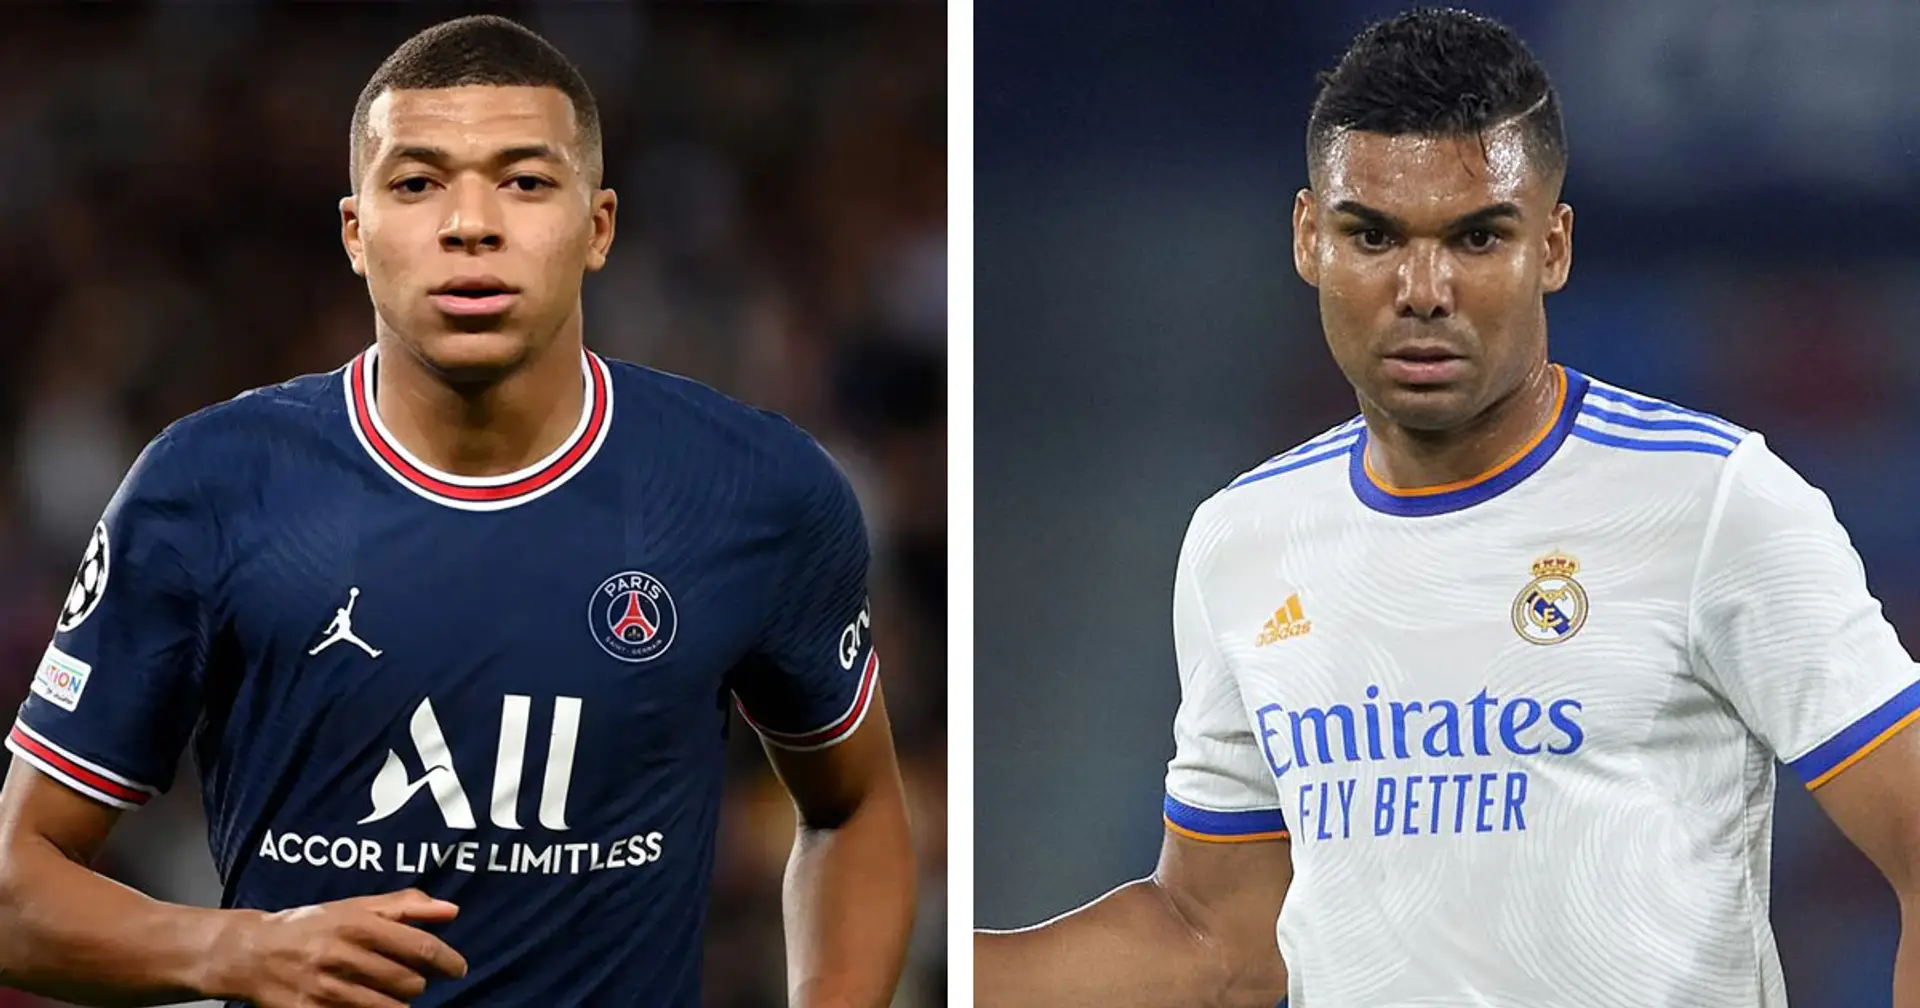 Mbappe mother confirms PSG extension talks & 2 more big stories you might've missed